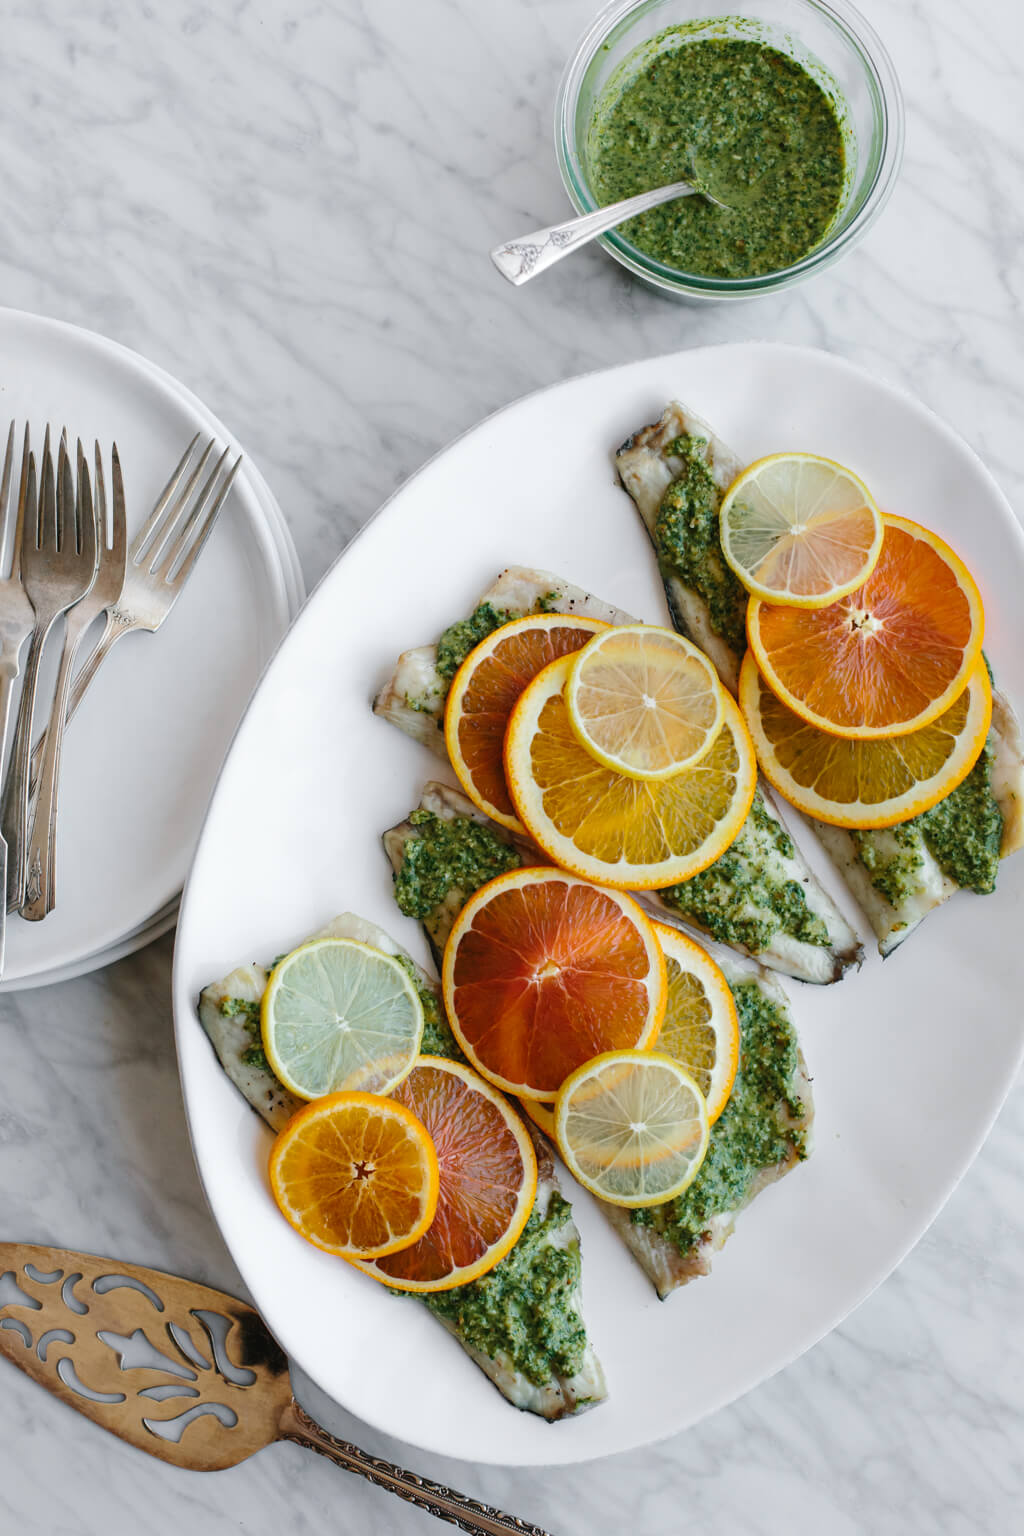 This roasted branzino with citrus pesto recipe is light, bright and extremely flavorful. It's sure to be your favorite fish recipe.